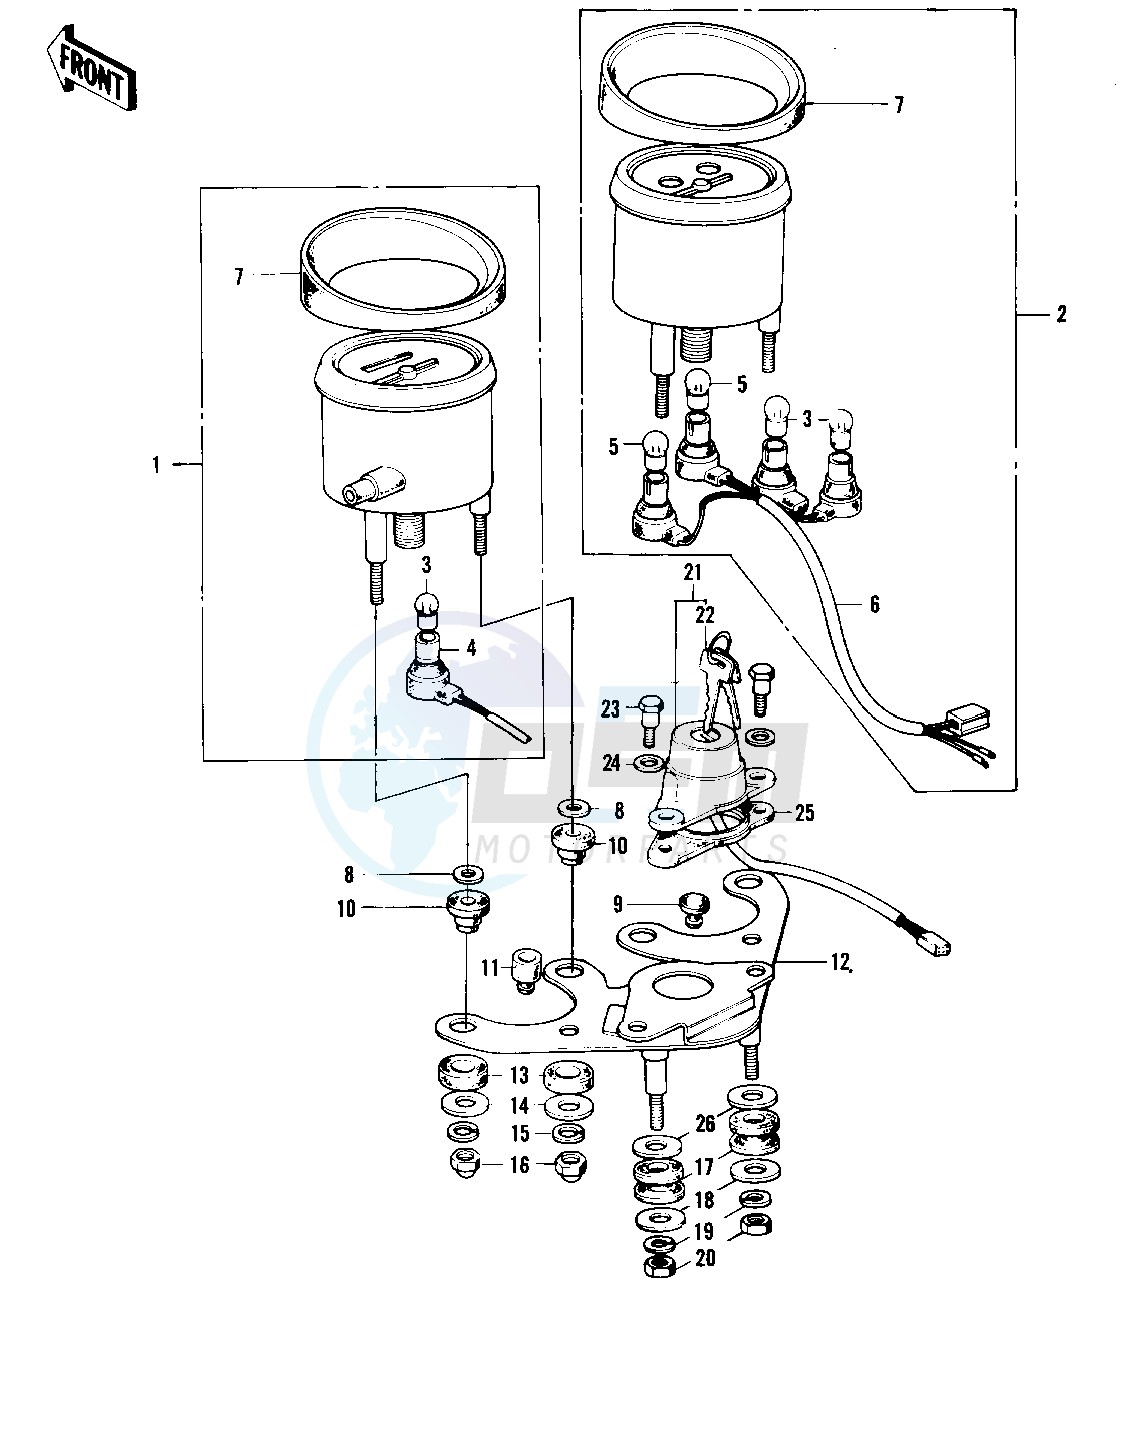 METERS_IGNITION SWITCH -- F9-A- - blueprint